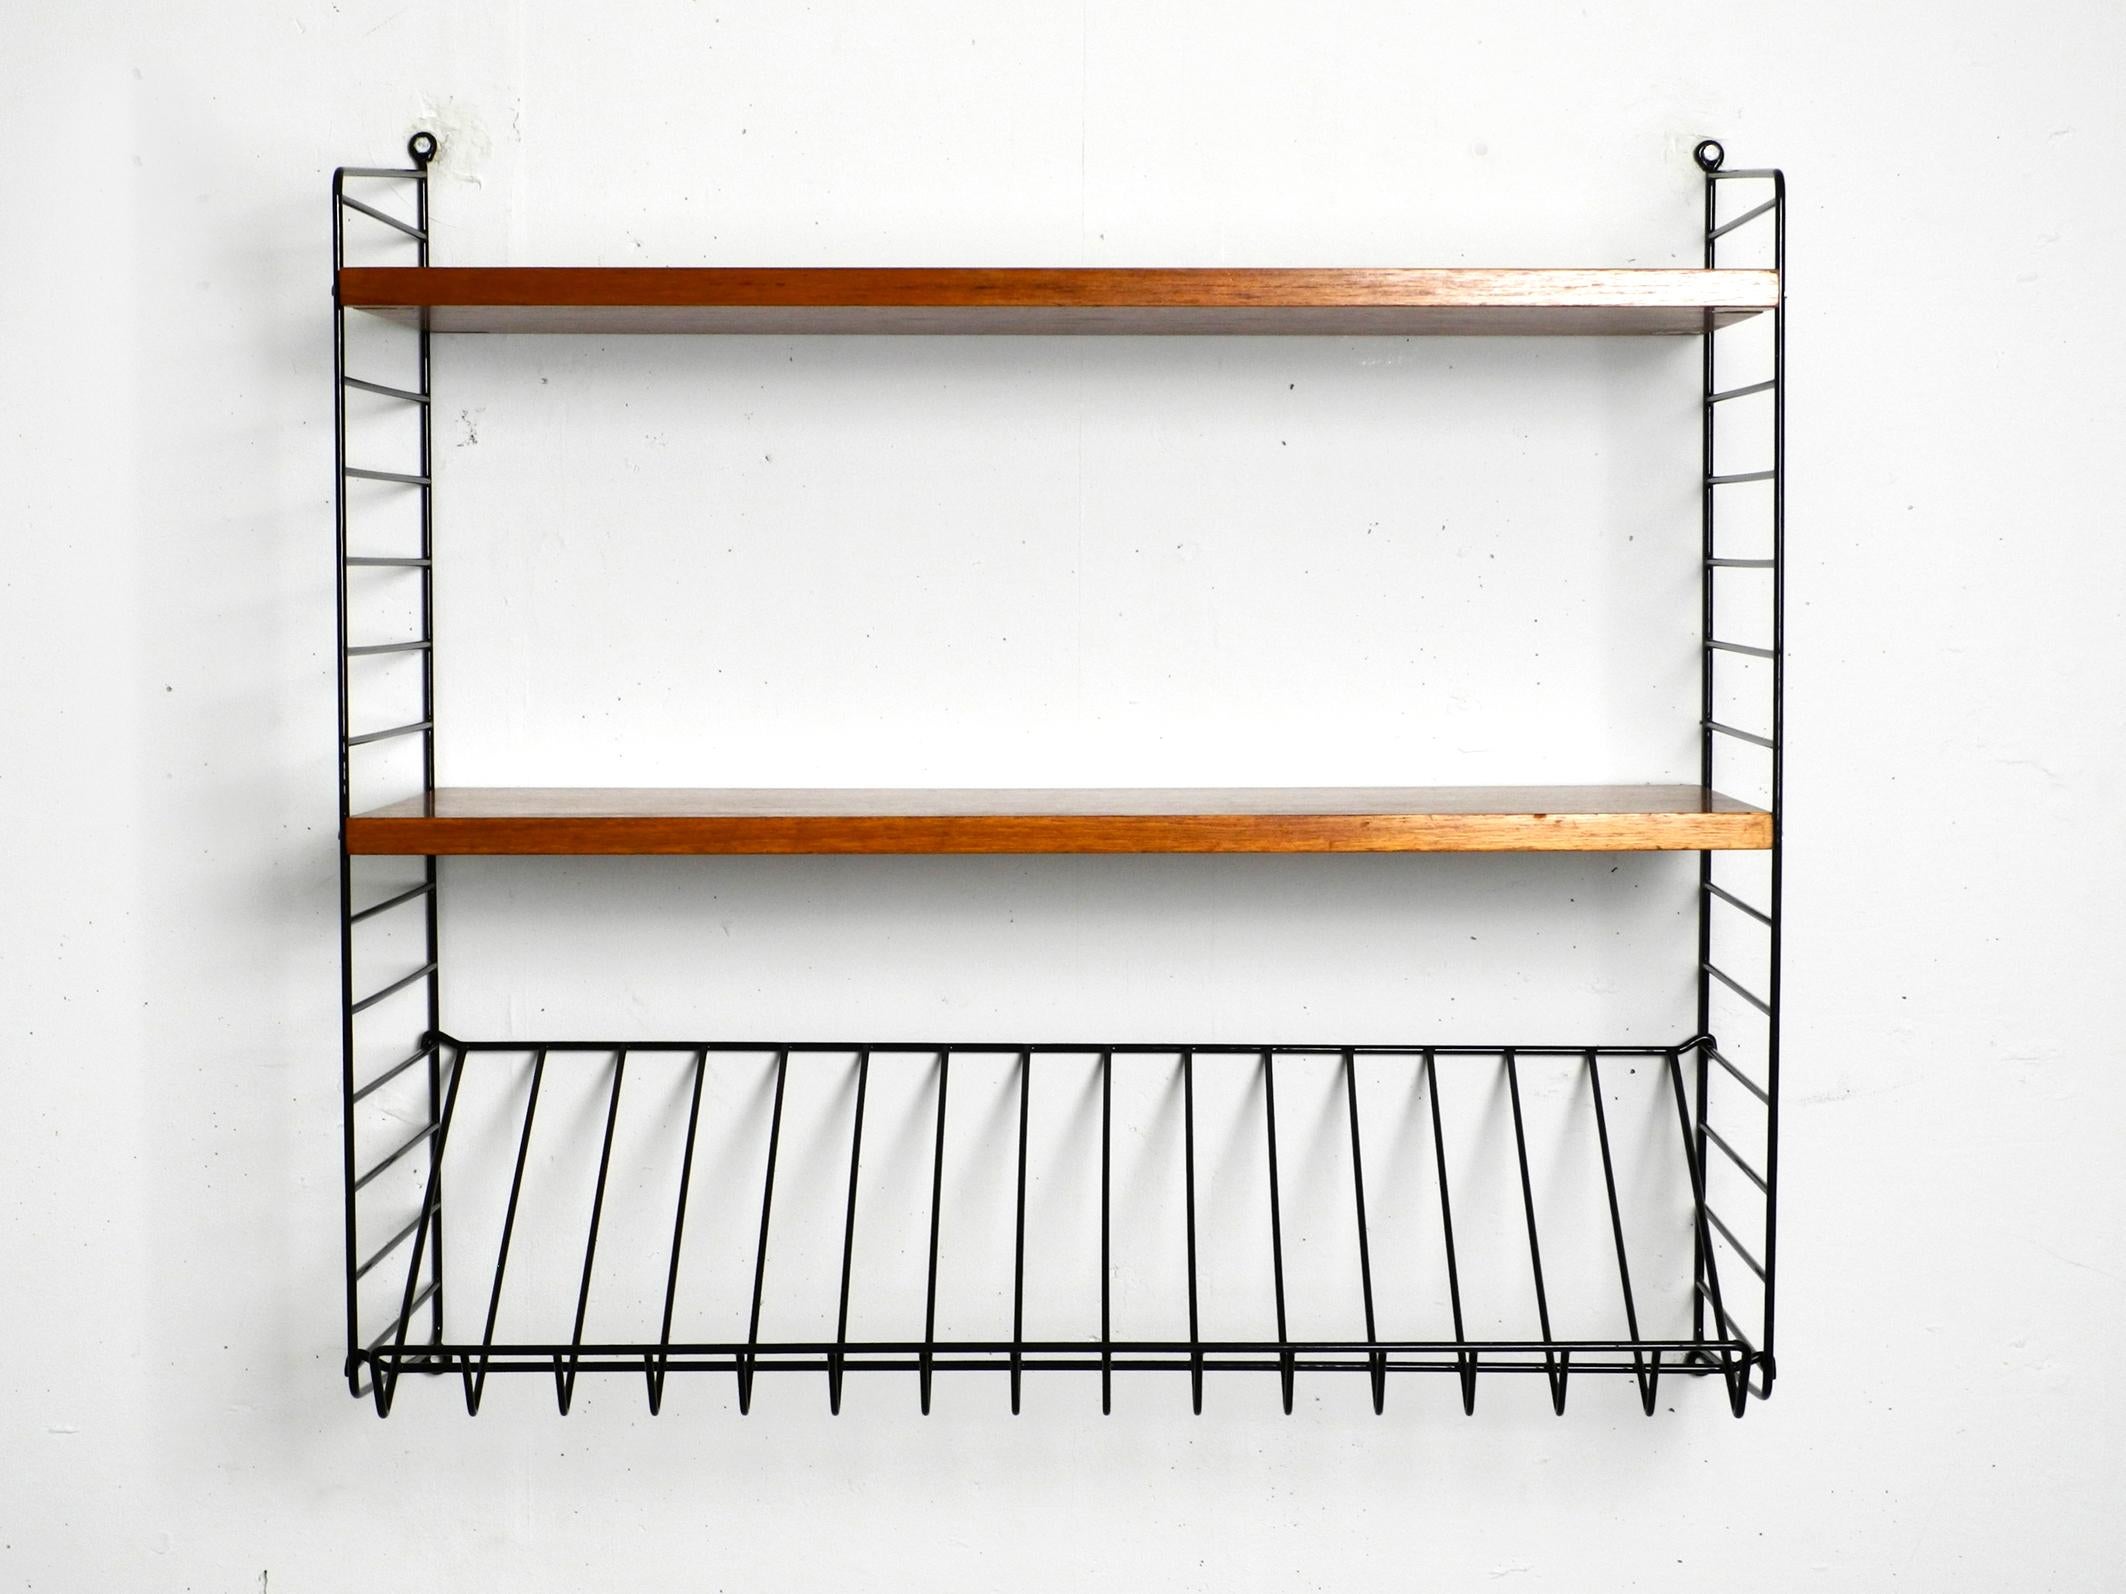 Original 1960s Nisse Strinning String teak wall shelf. Made in Denmark.
Two deep ladders with two 30 cm deep boards and one magazine rack.
All wooden parts are covered with teak veneer.
Very clean with few normal signs of wear.
All ladders are